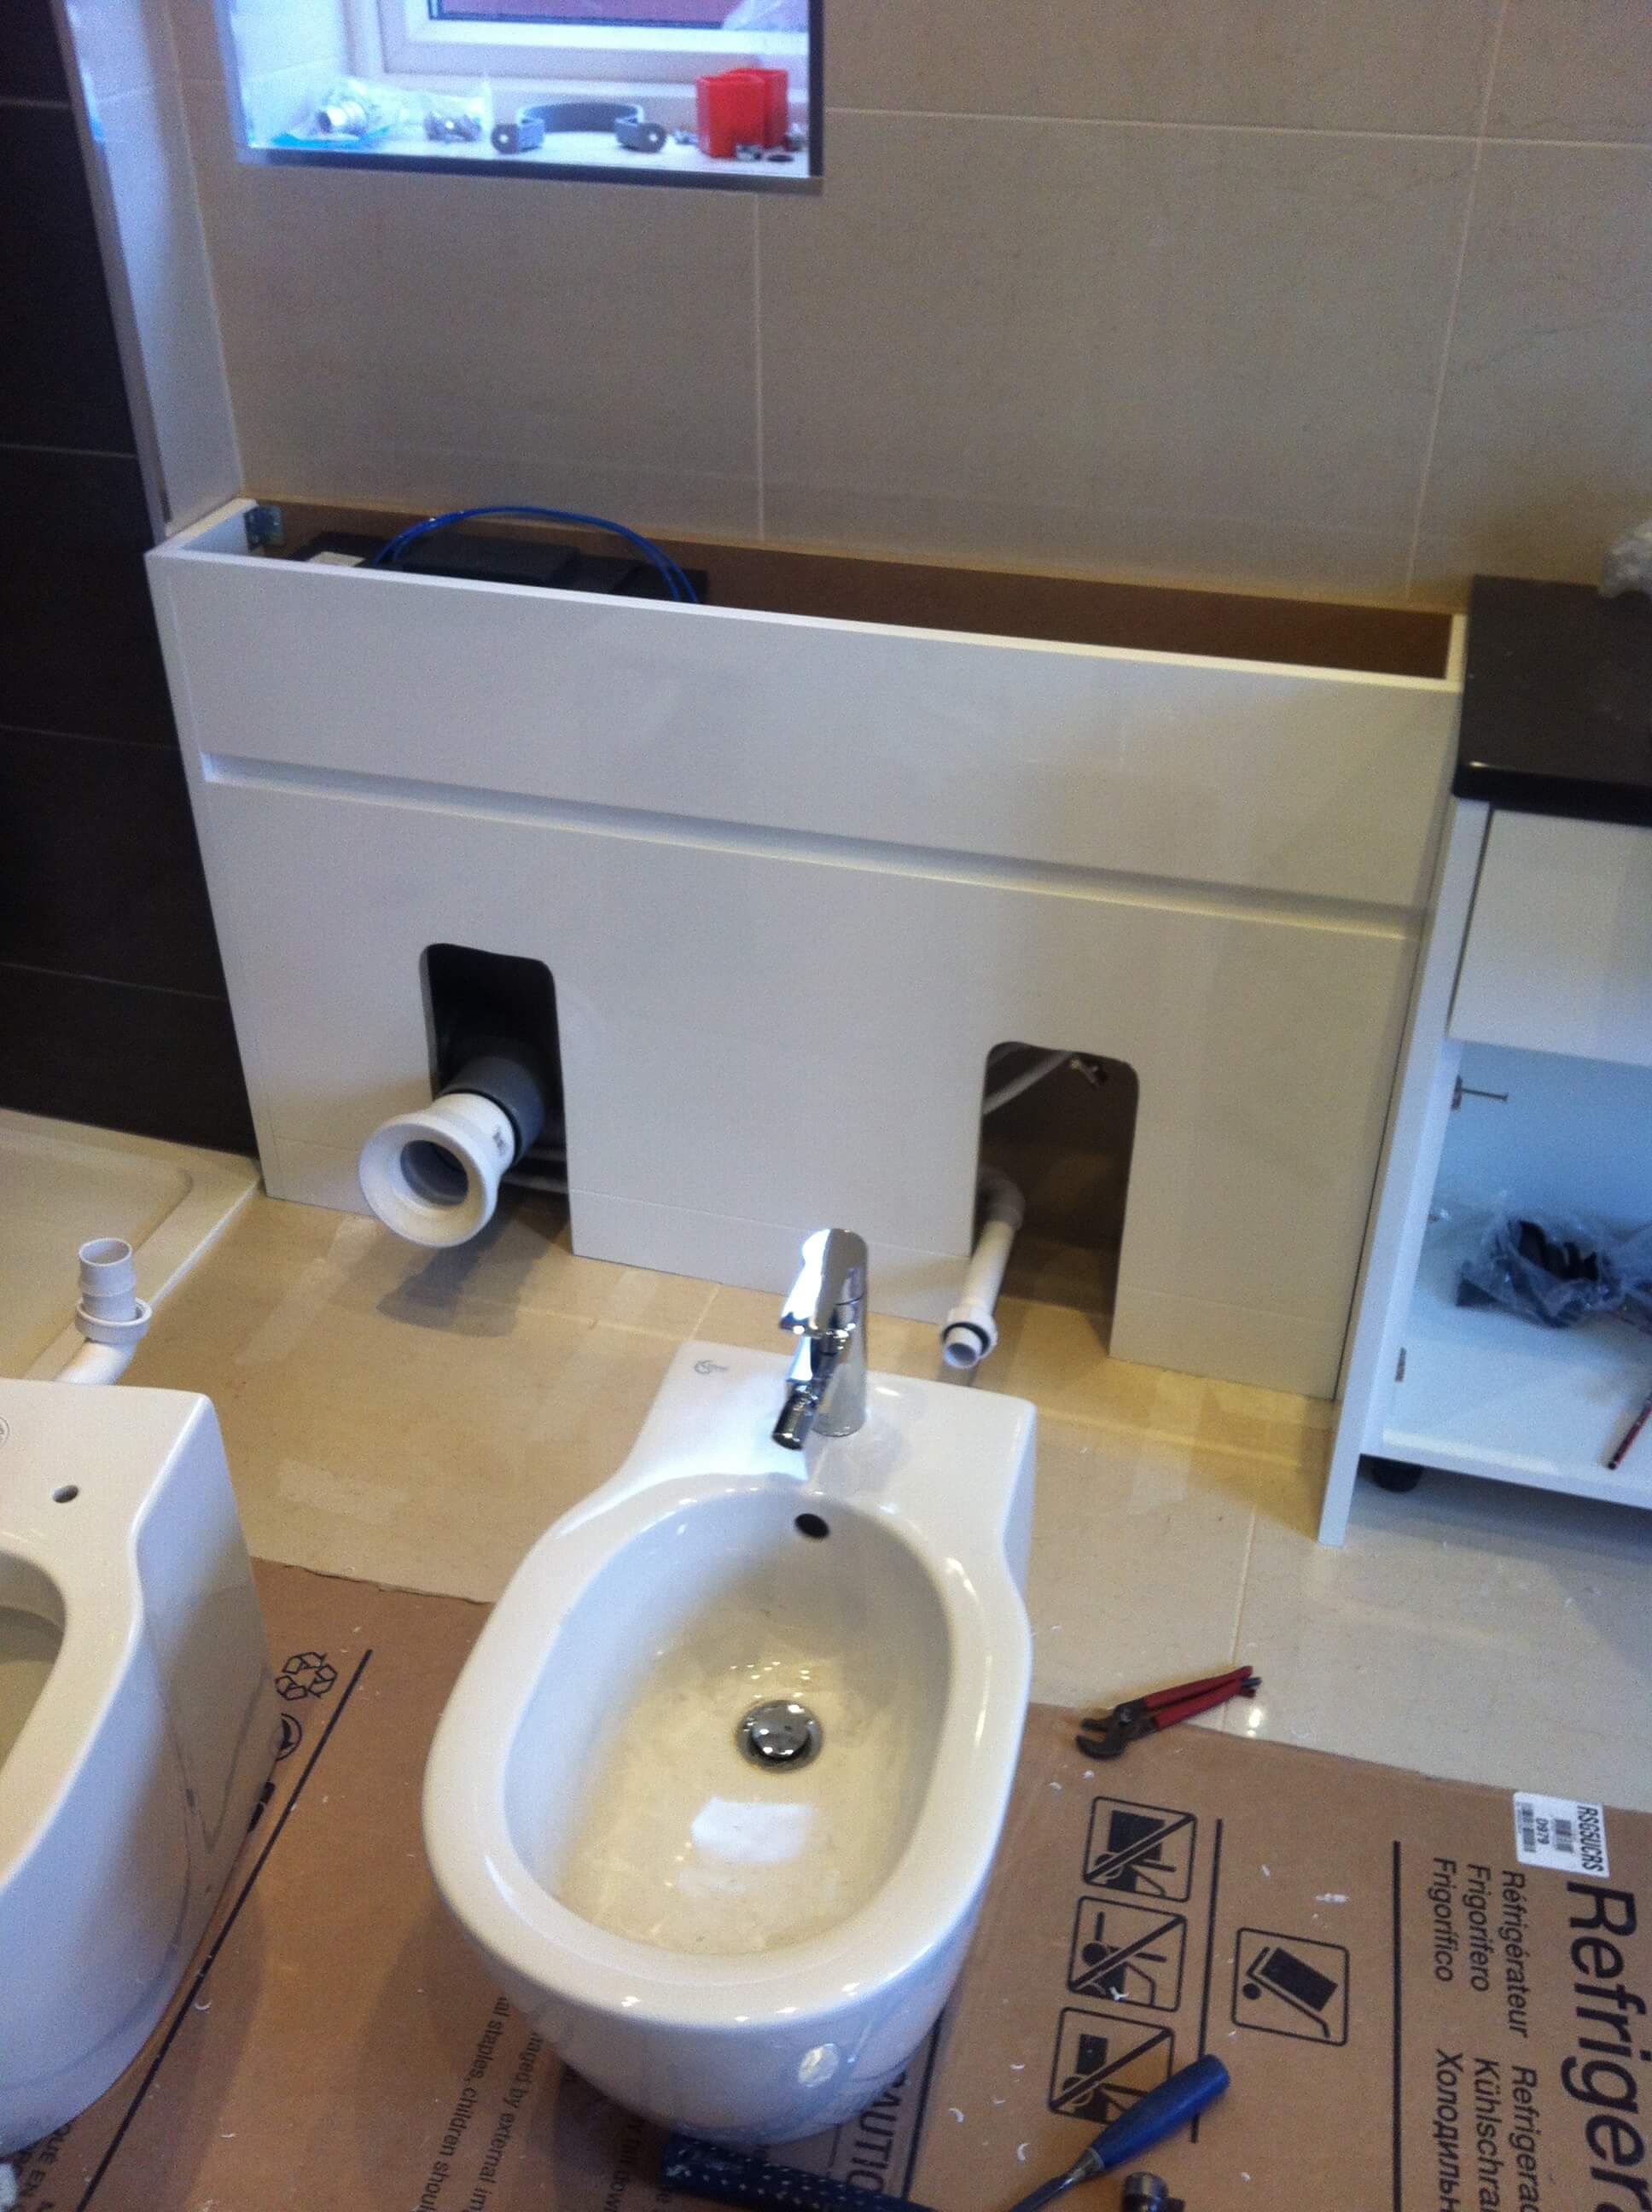 Ready for the toilet and Bidet to be fitted